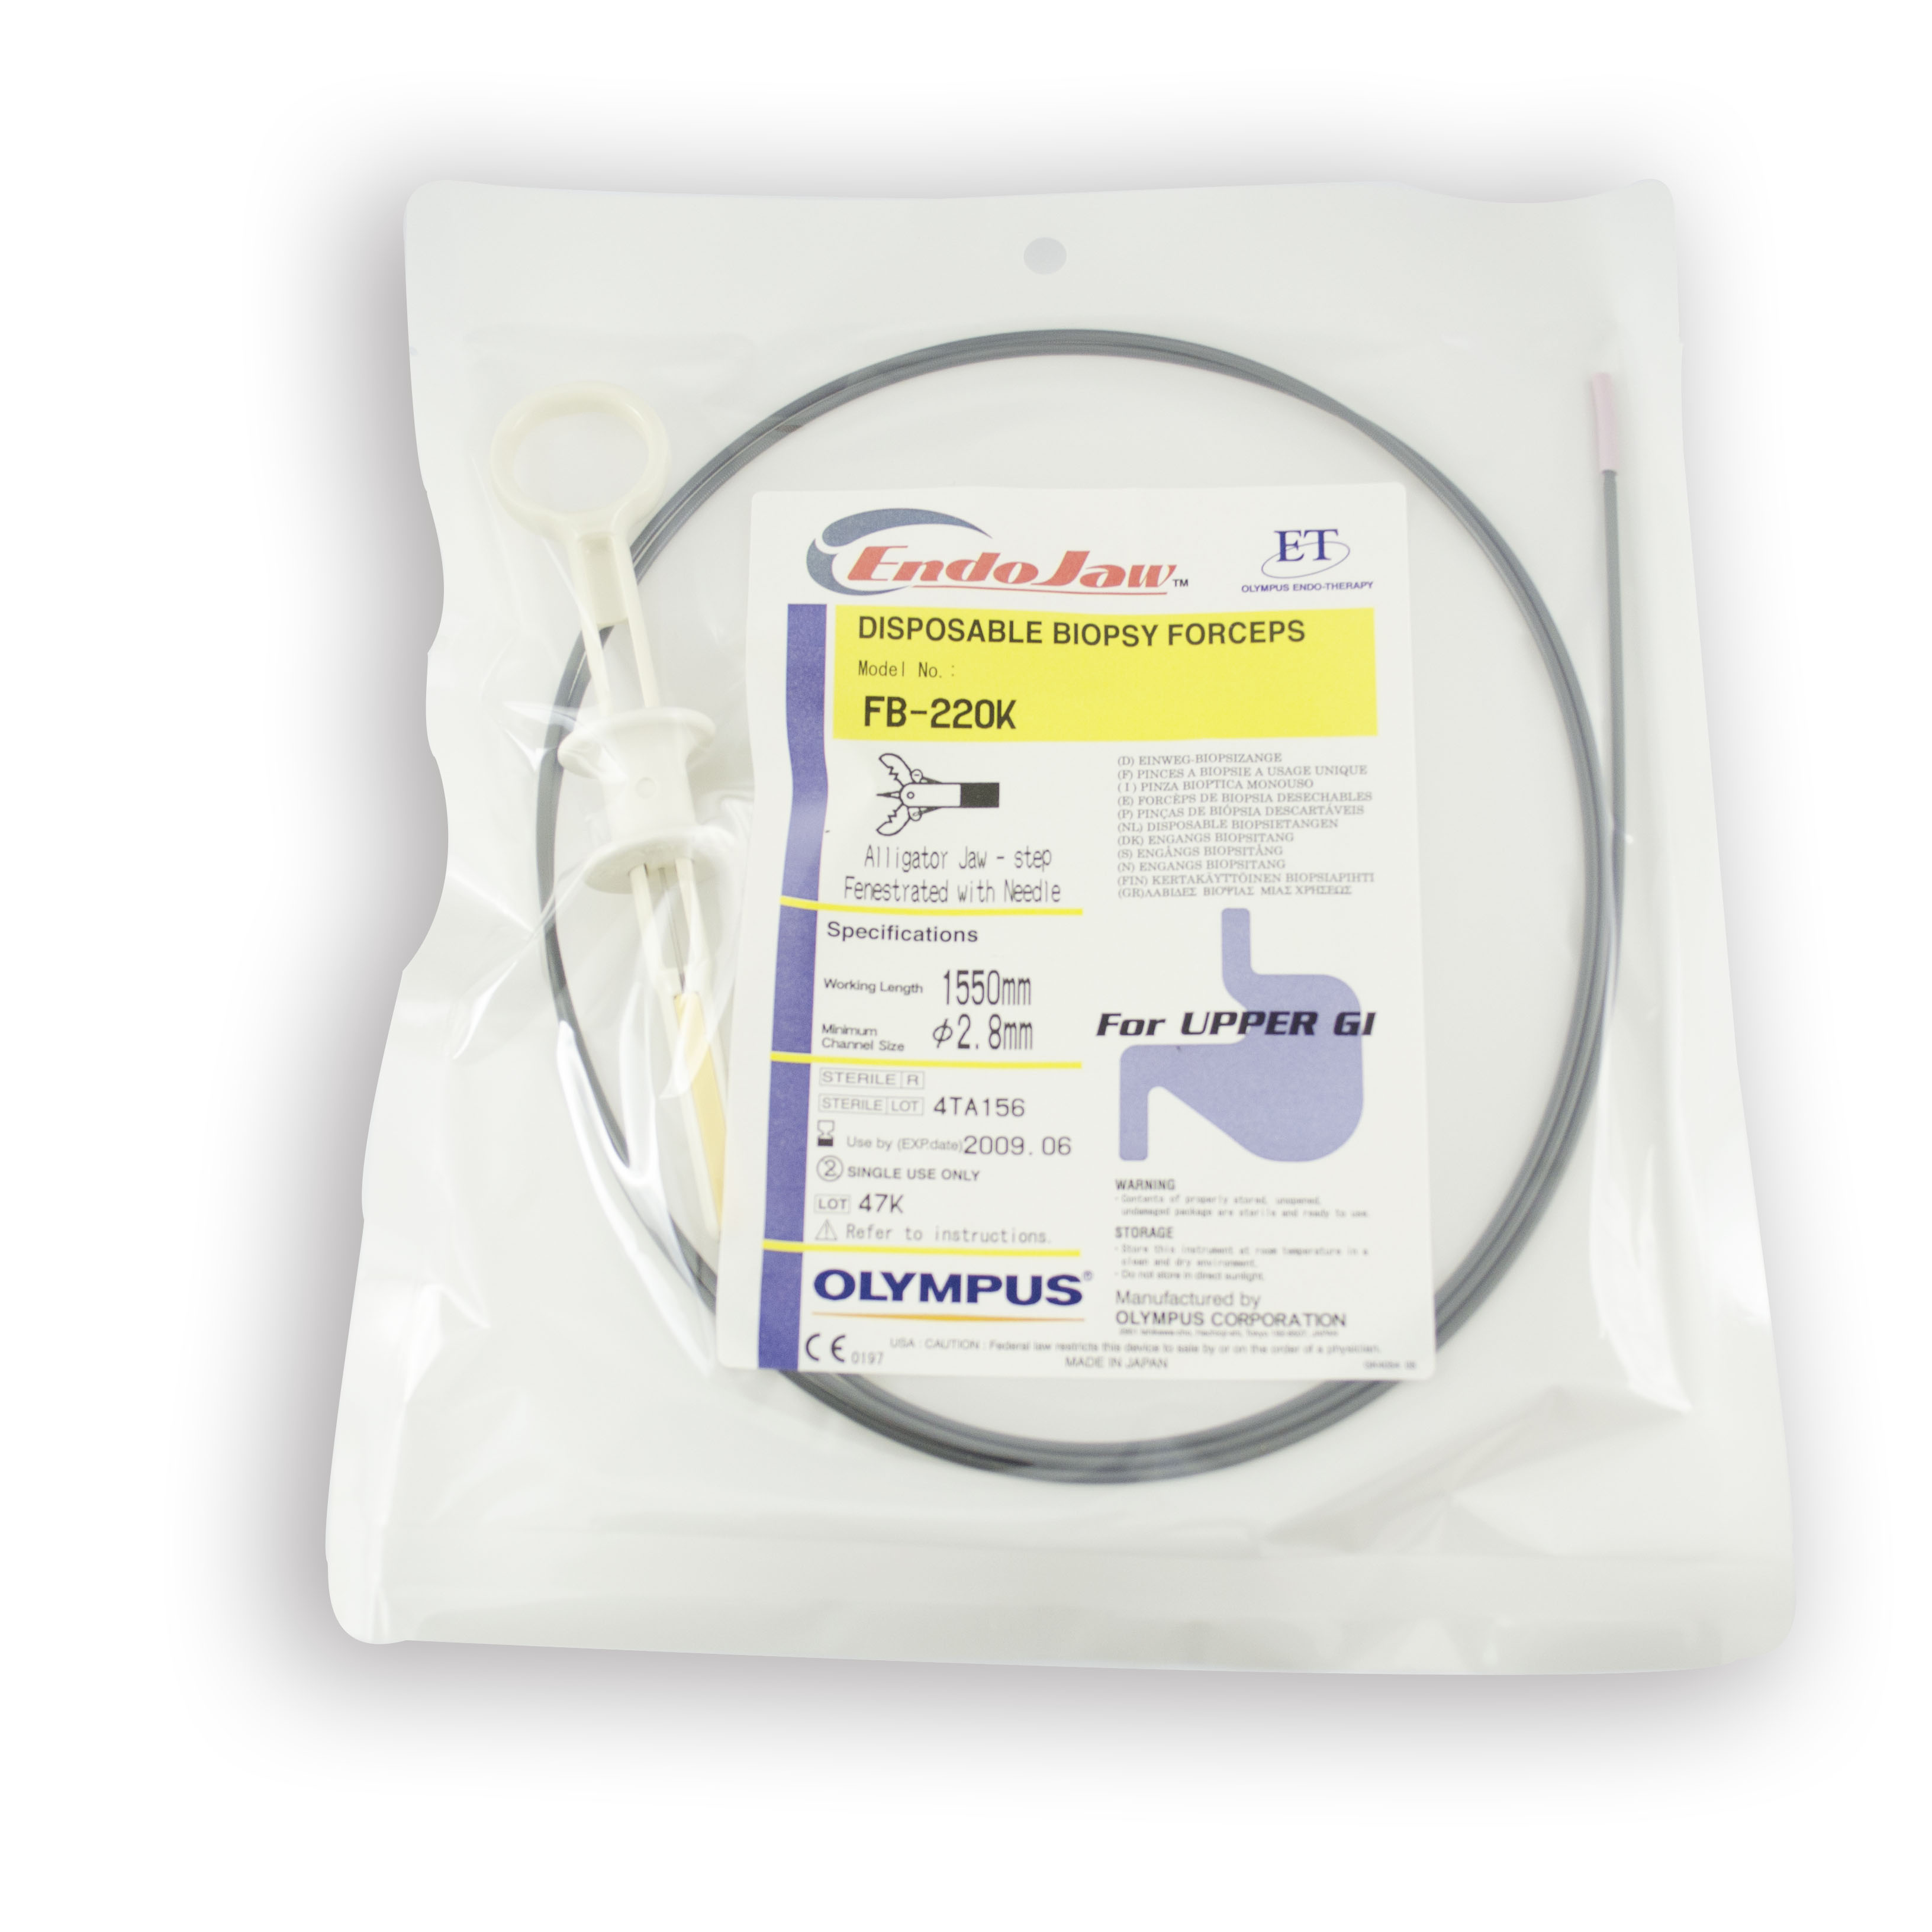 [Out-of-Date] Olympus Disposable Biopsy Forceps - FB-220K